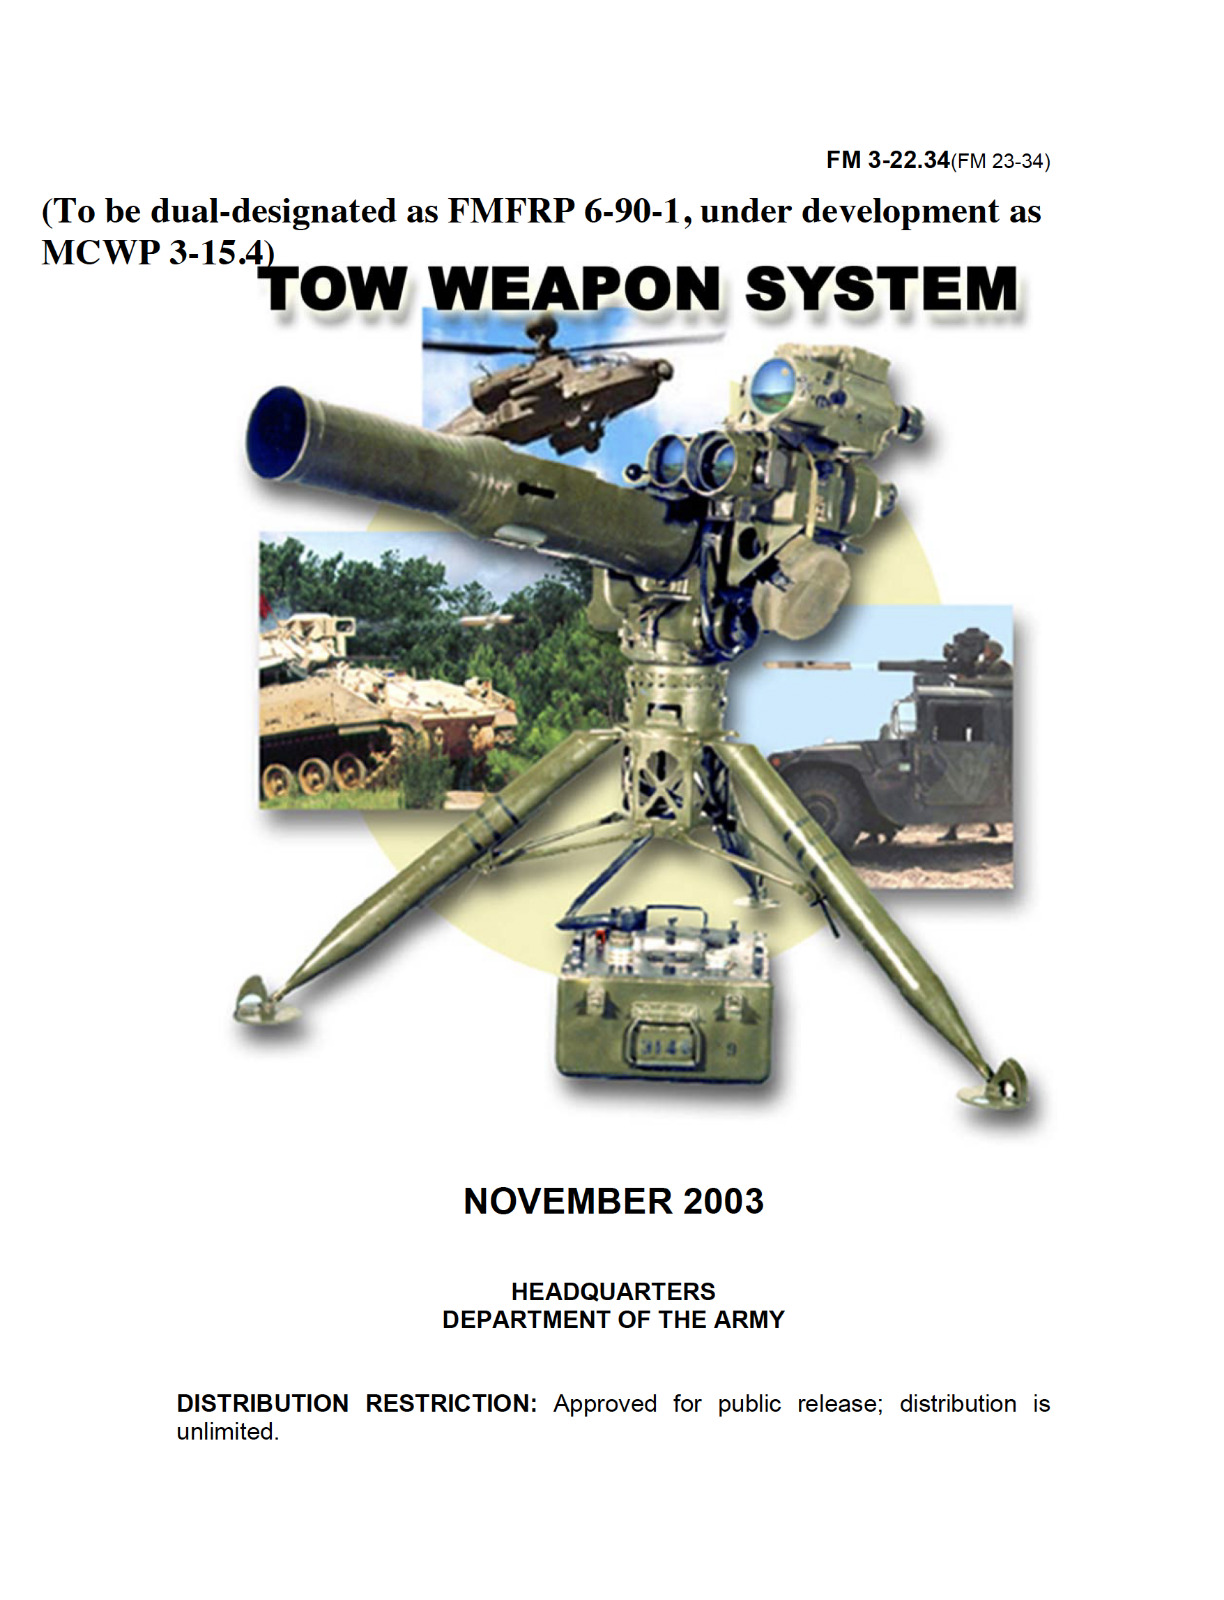 192 Page 2003 M220 -A1 -A2 M966 TOW TOW2 WEAPON SYSTEM FM 3-22.34 Manual on CD